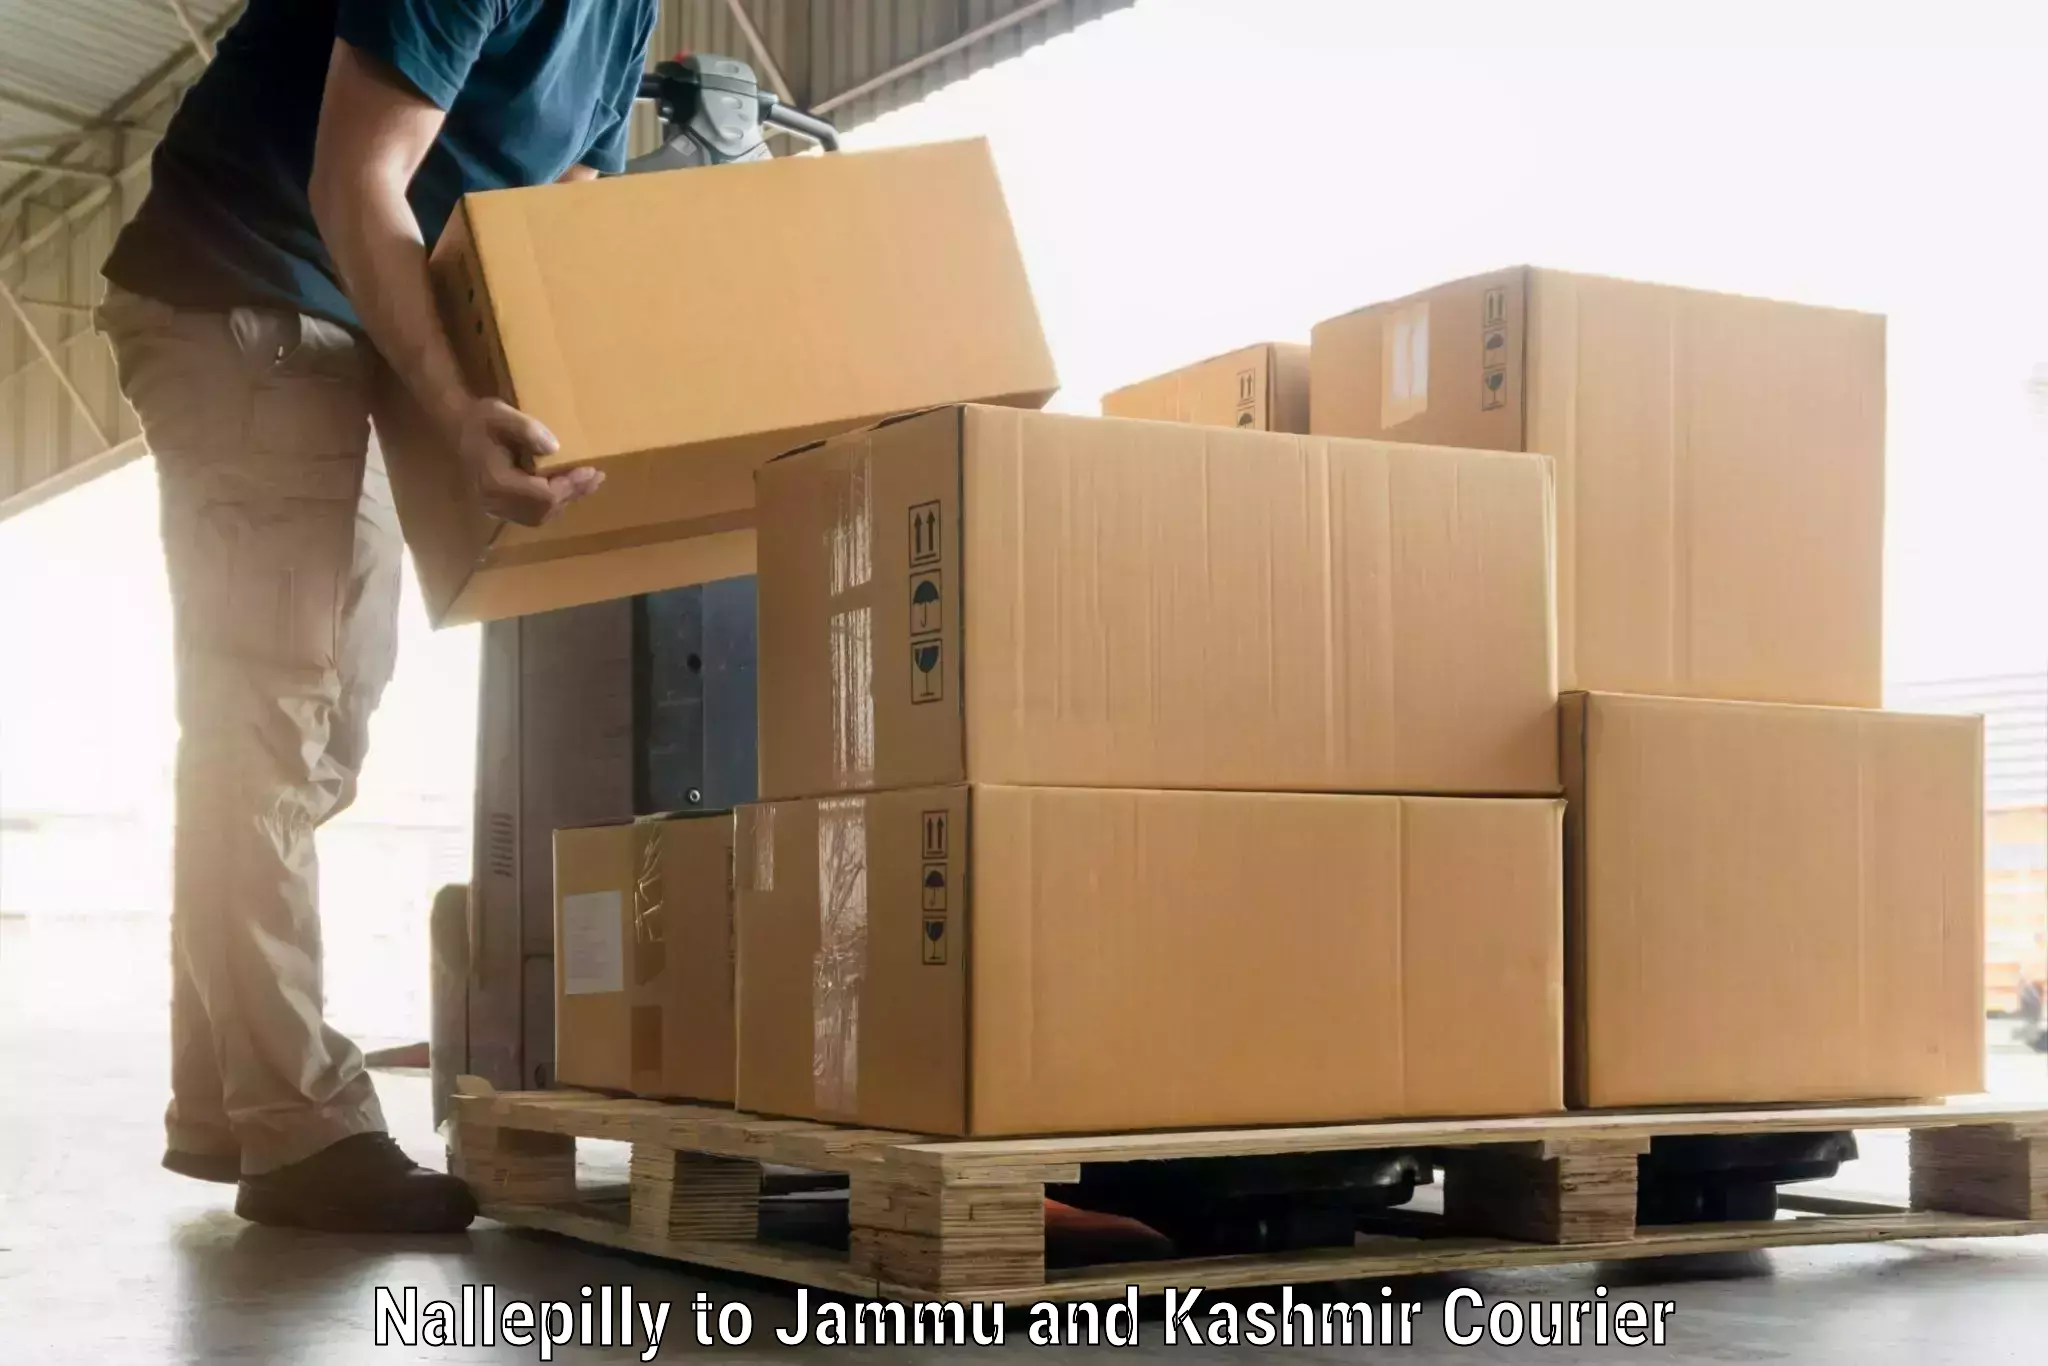 Instant baggage transport quote Nallepilly to Pulwama